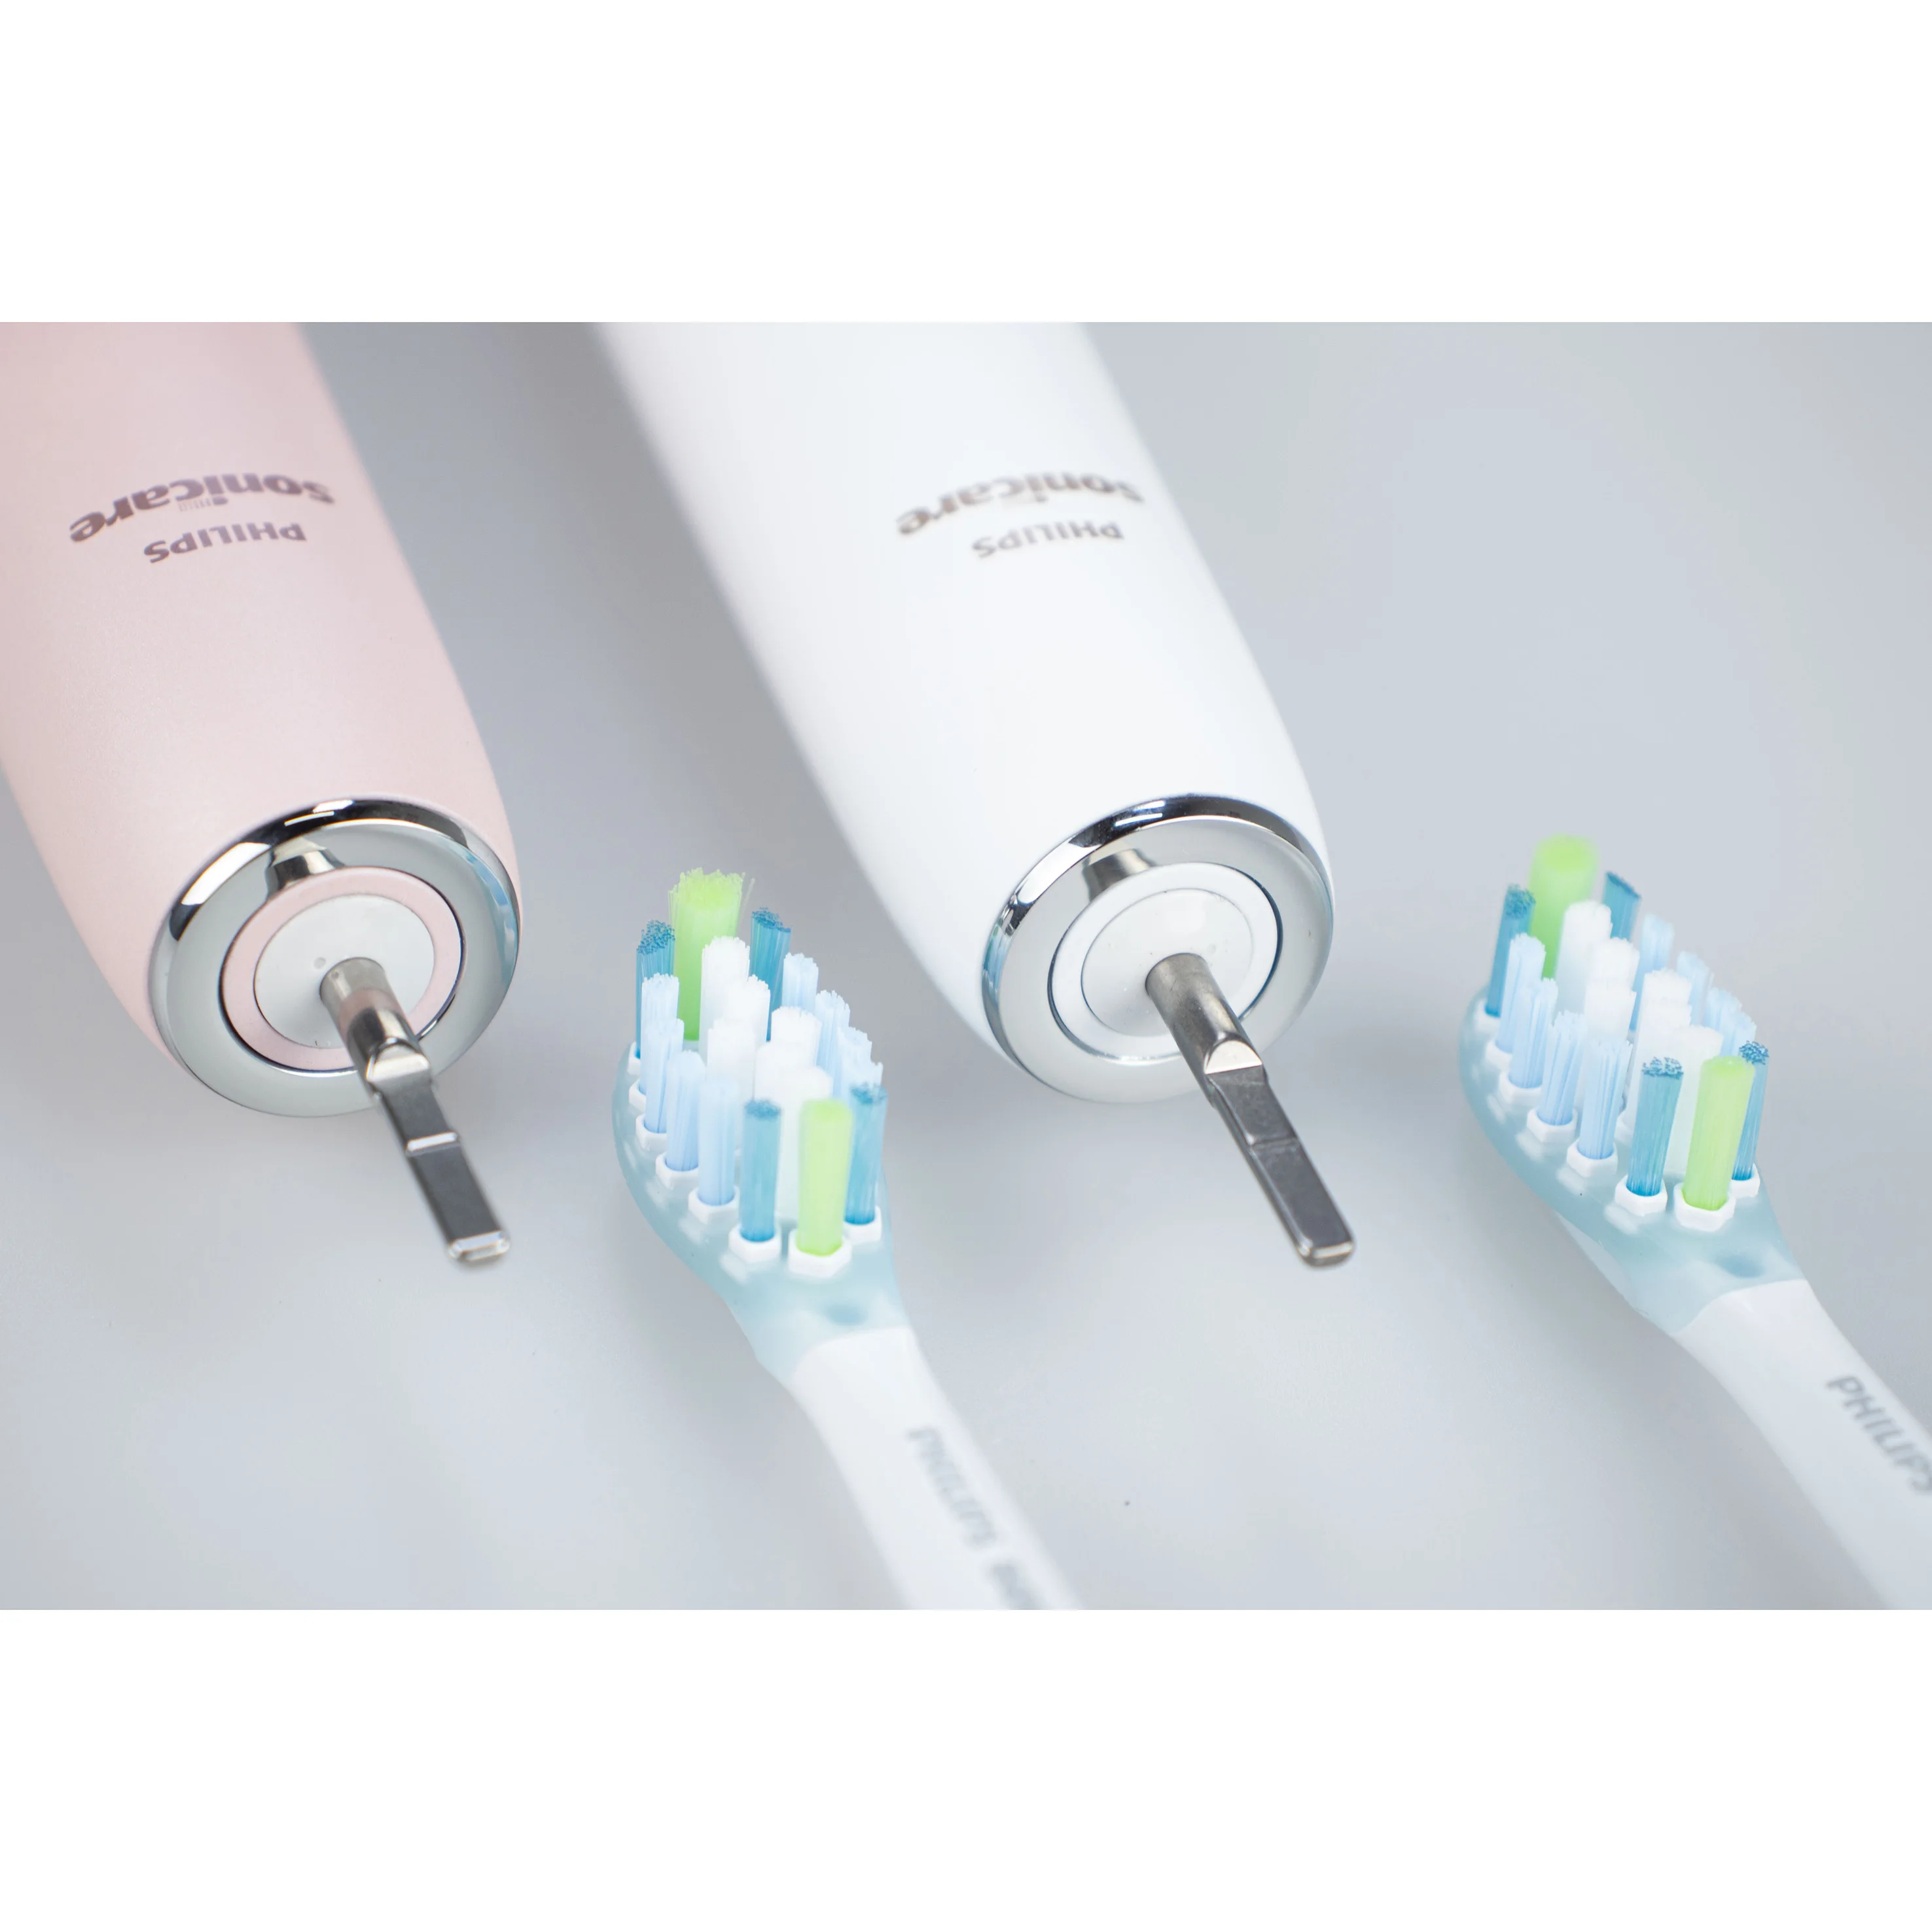 Philips Sonicare DiamondClean 9000 HX9913 Rechargeable Electric Power Toothbrush, Pink， White